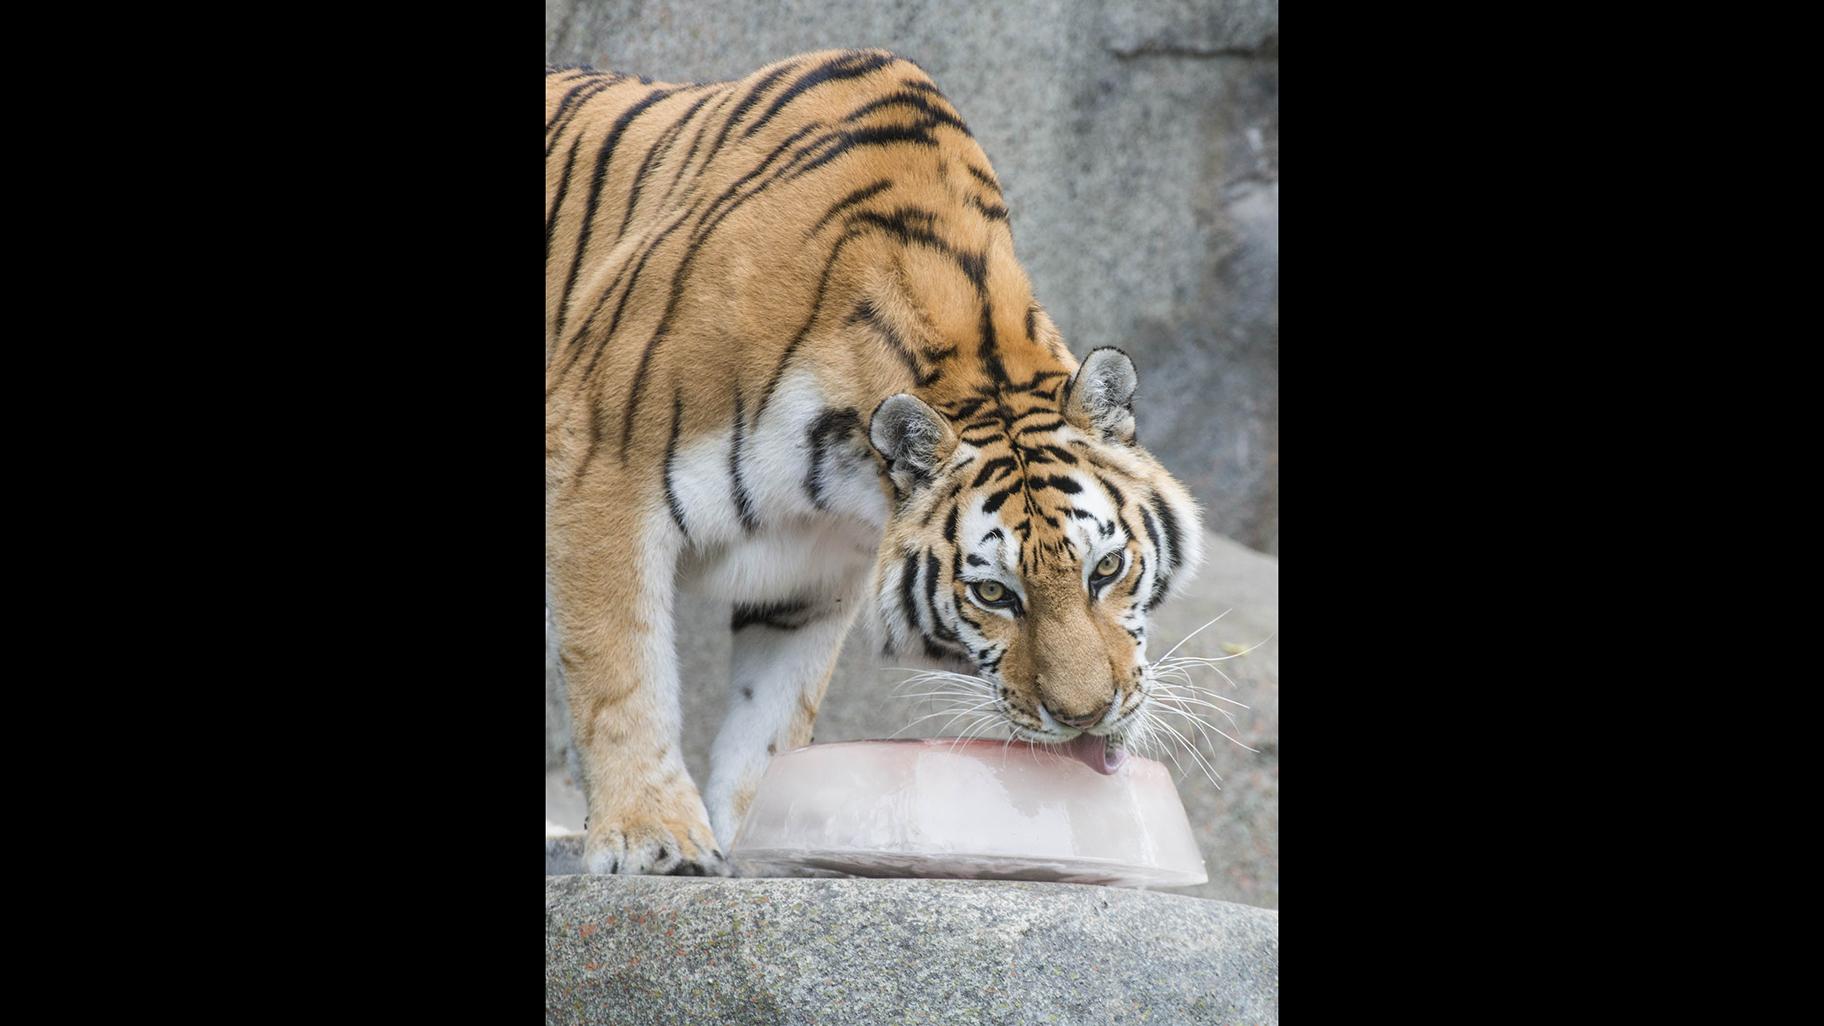 Whirl, an Amur tiger at Brookfield Zoo, received an ice treat filled with chuck meat and bones. (Kelly Tone / Chicago Zoological Society) 